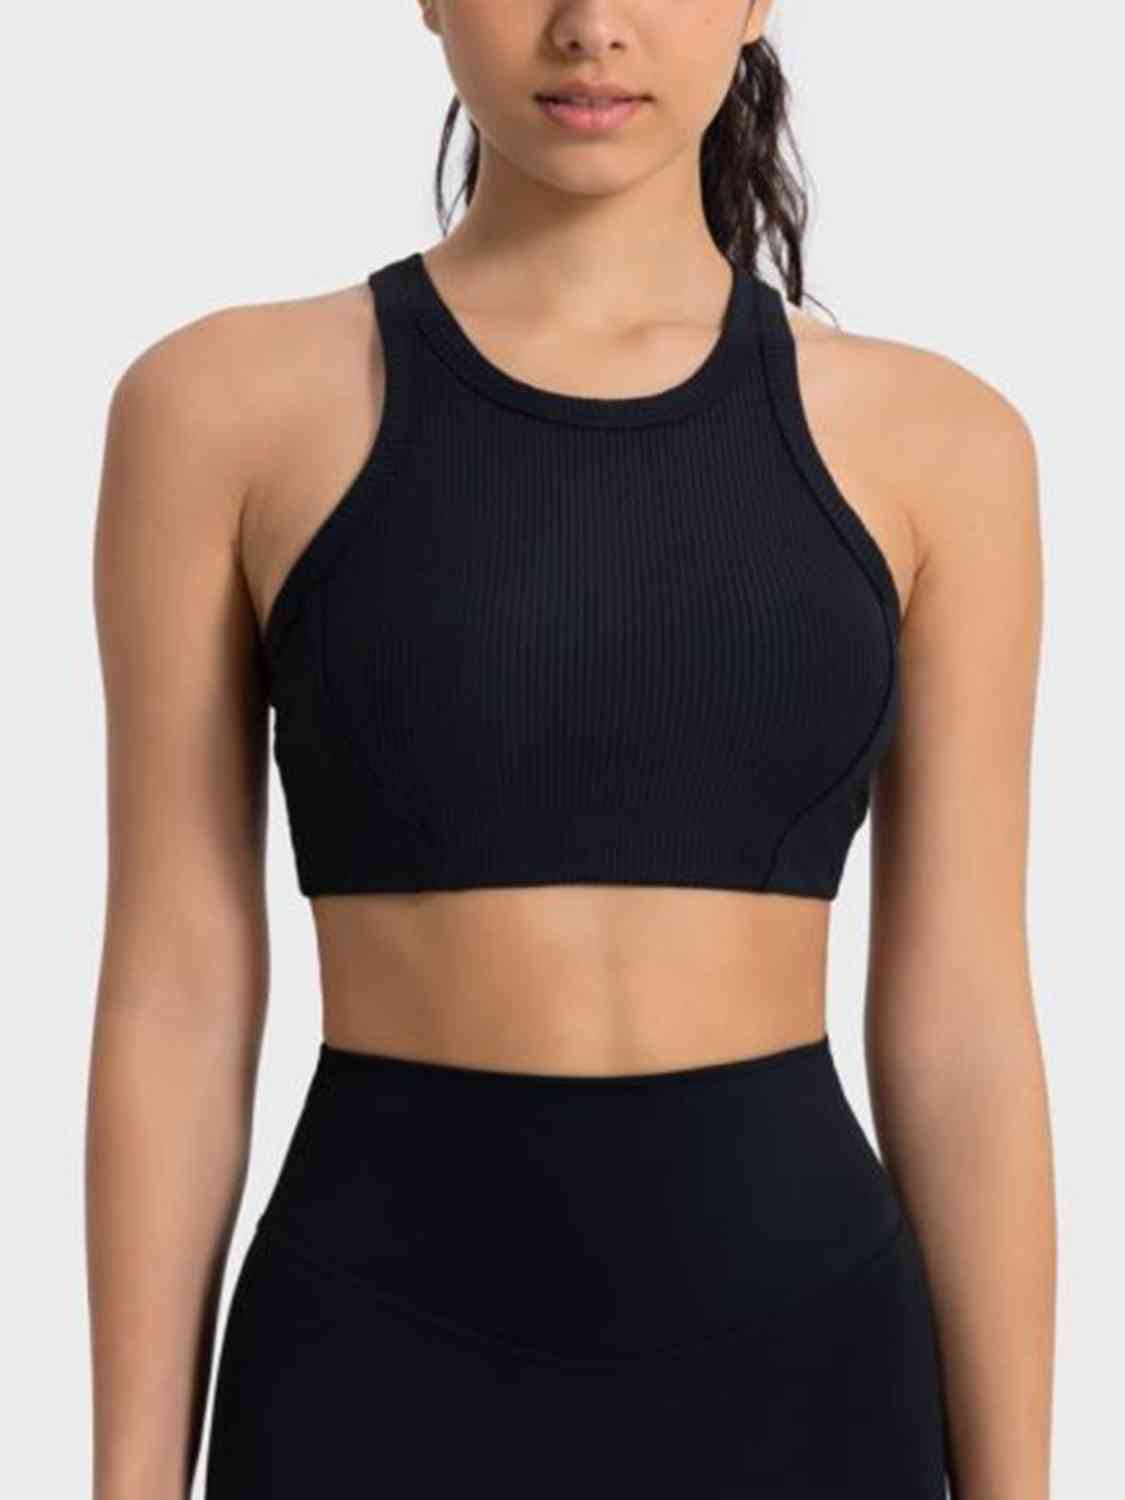 Black Wide Strap Cropped Sport Tank Sentient Beauty Fashions Apparel & Accessories